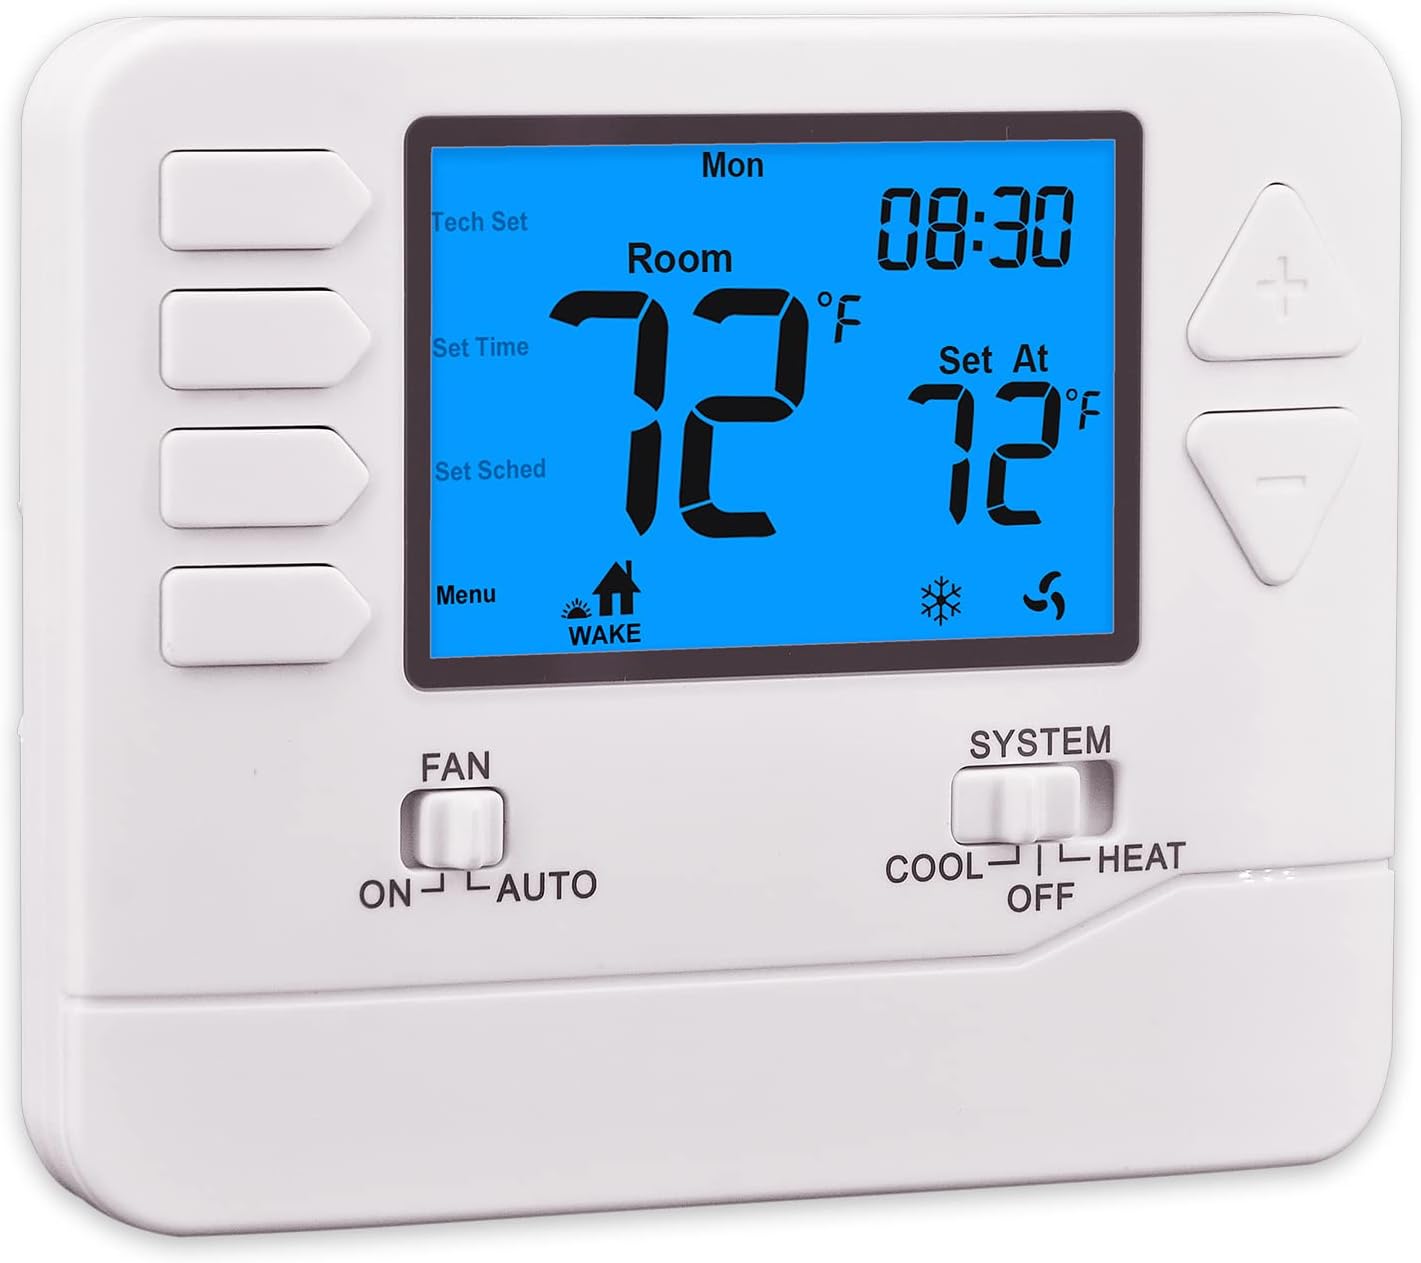 Thermostats, Suuwer 5-1-1 Day Programmable Thermostat [...]